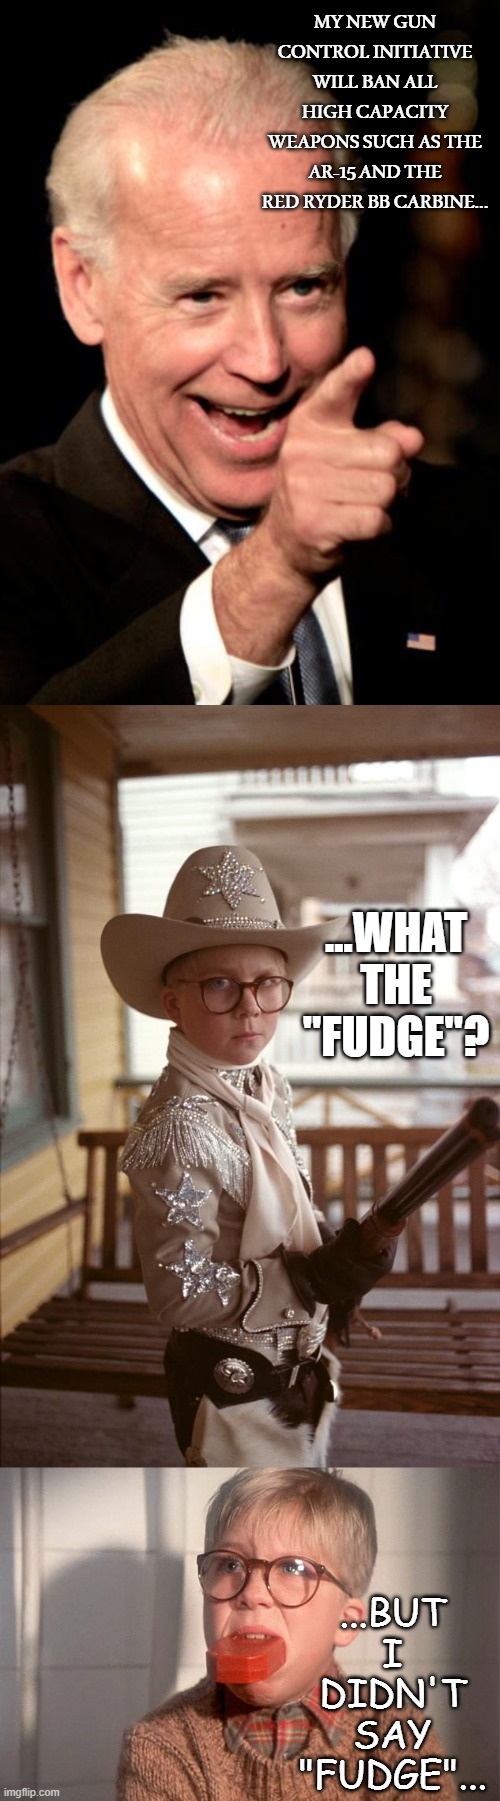 President "Fudge" for brains... | ...WHAT THE "FUDGE"? ...BUT I DIDN'T SAY "FUDGE"... | image tagged in a christmas story,biden,gun control | made w/ Imgflip meme maker